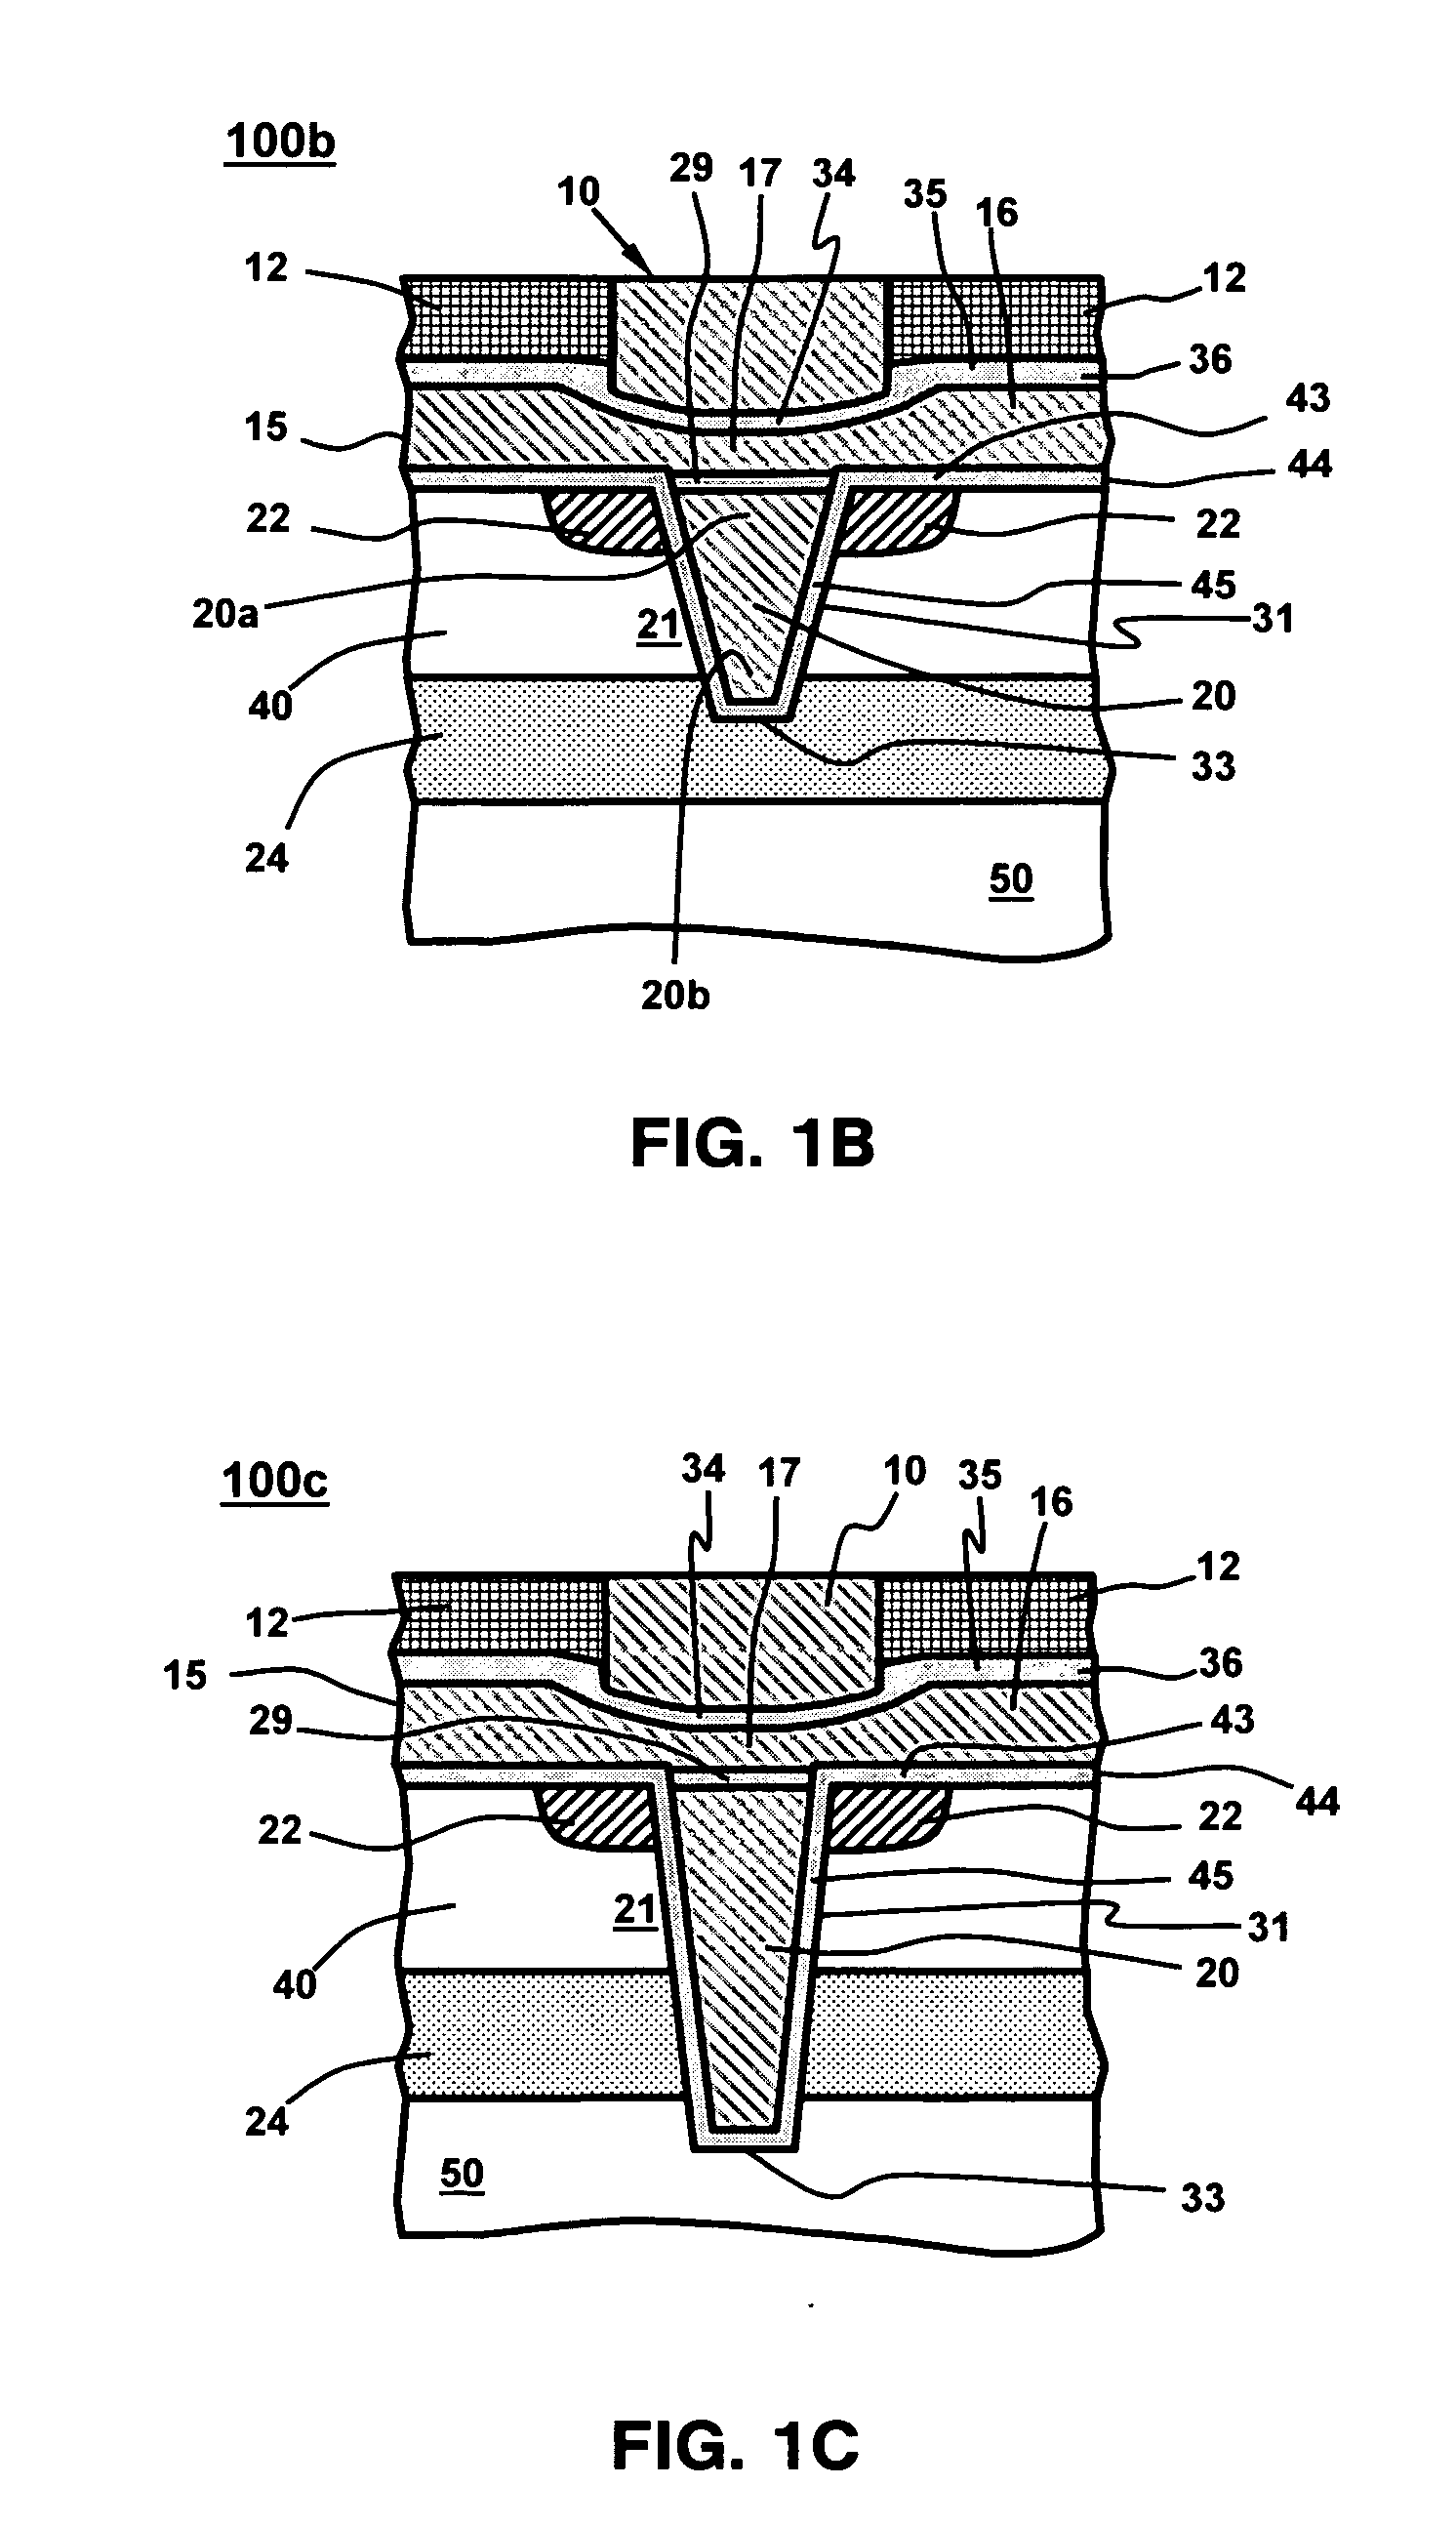 Method of forming floating-gate memory cell having trench structure with ballistic-charge injector, and the array of memory cells made thereby